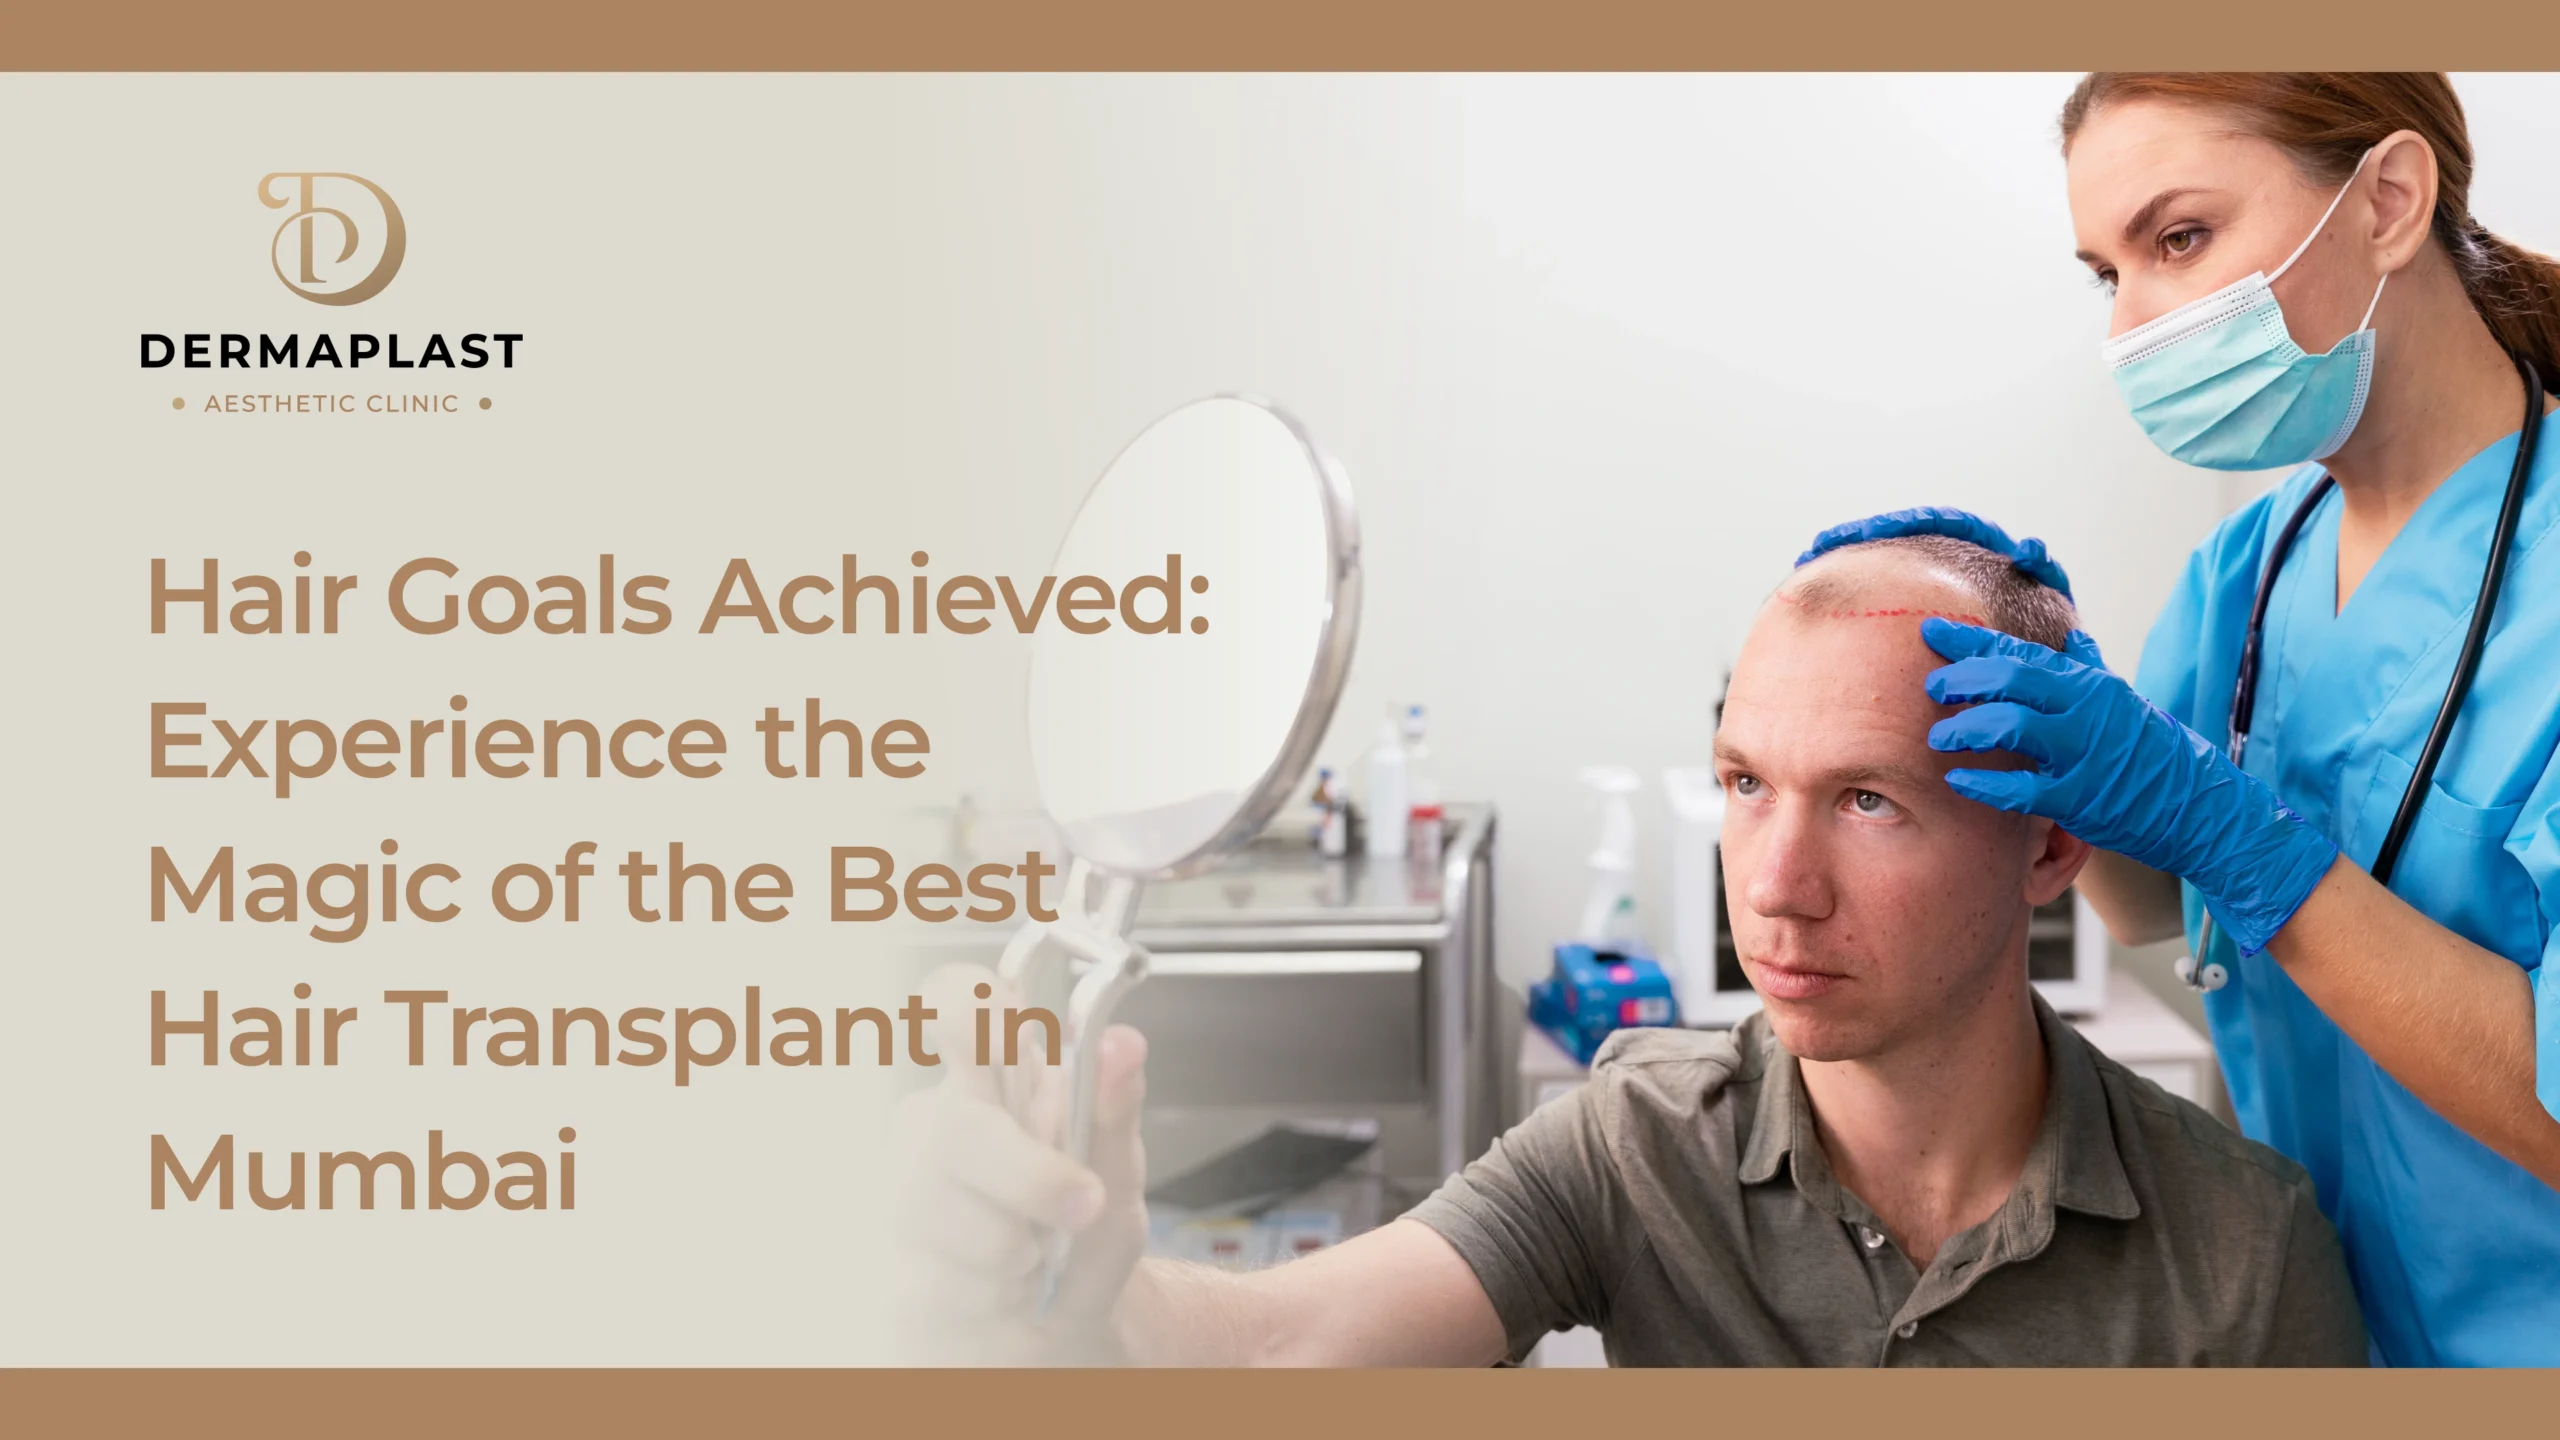 Hair Goals Achieved: Experience the Magic of the Best Hair Transplant in Mumbai